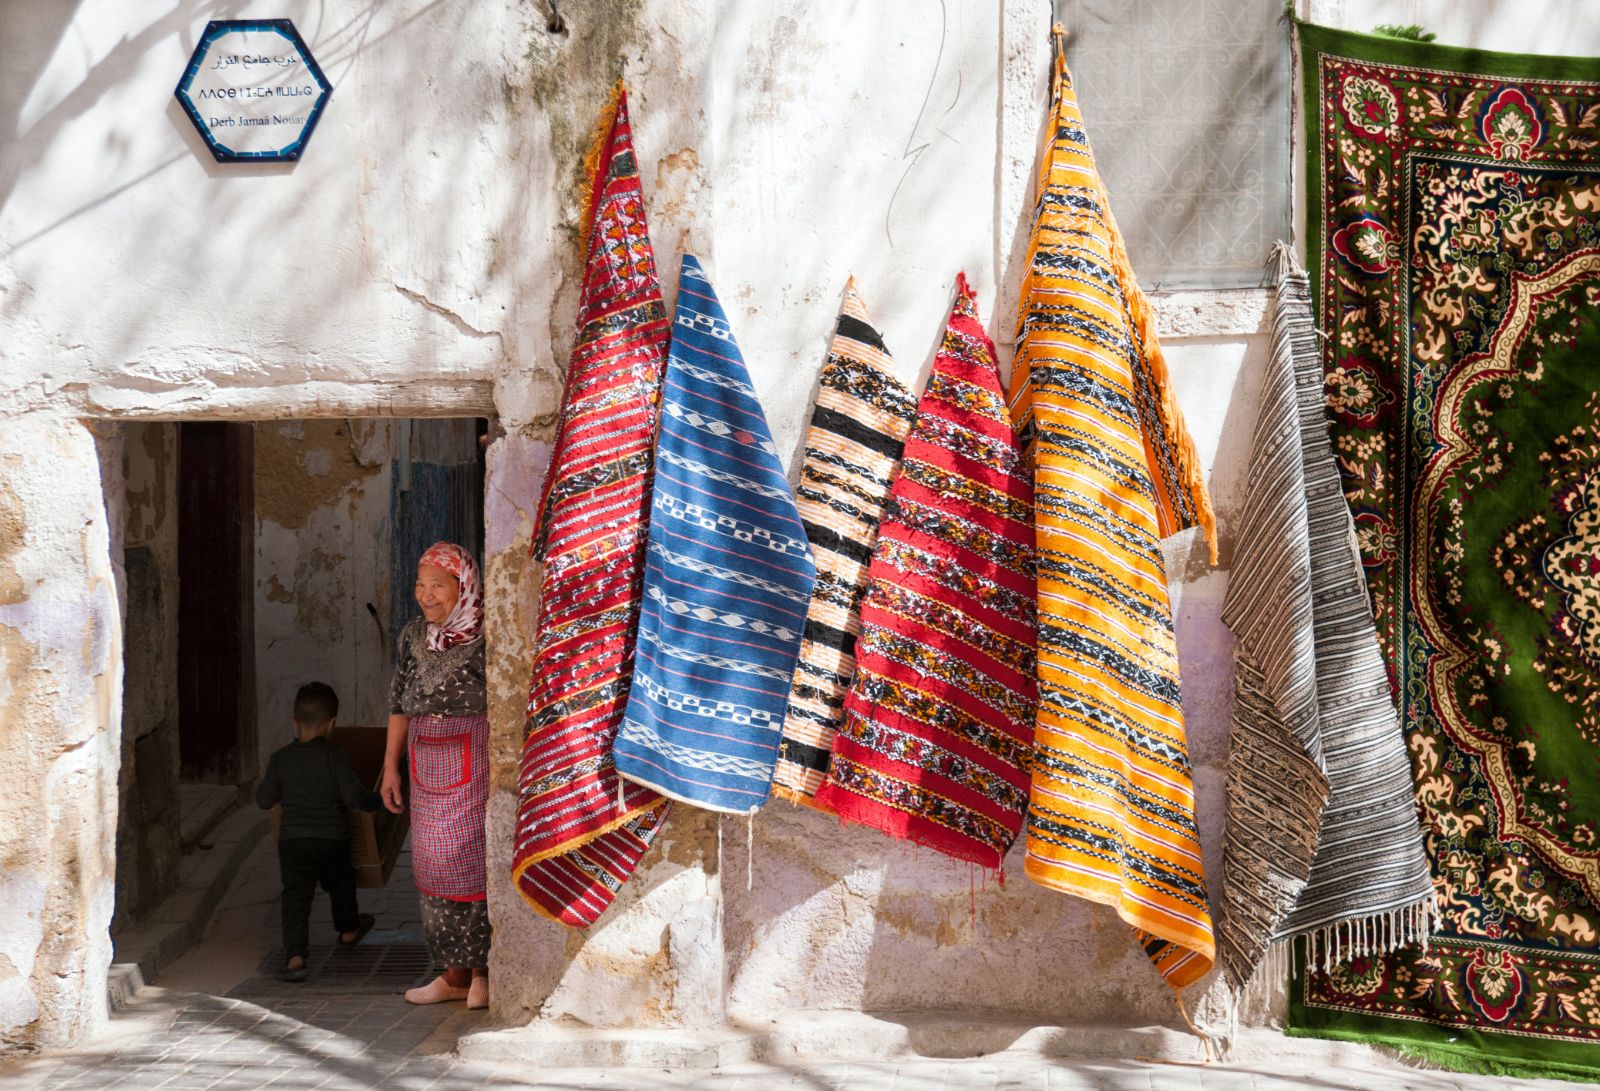 A woman selling rugs in the streets of Morocco